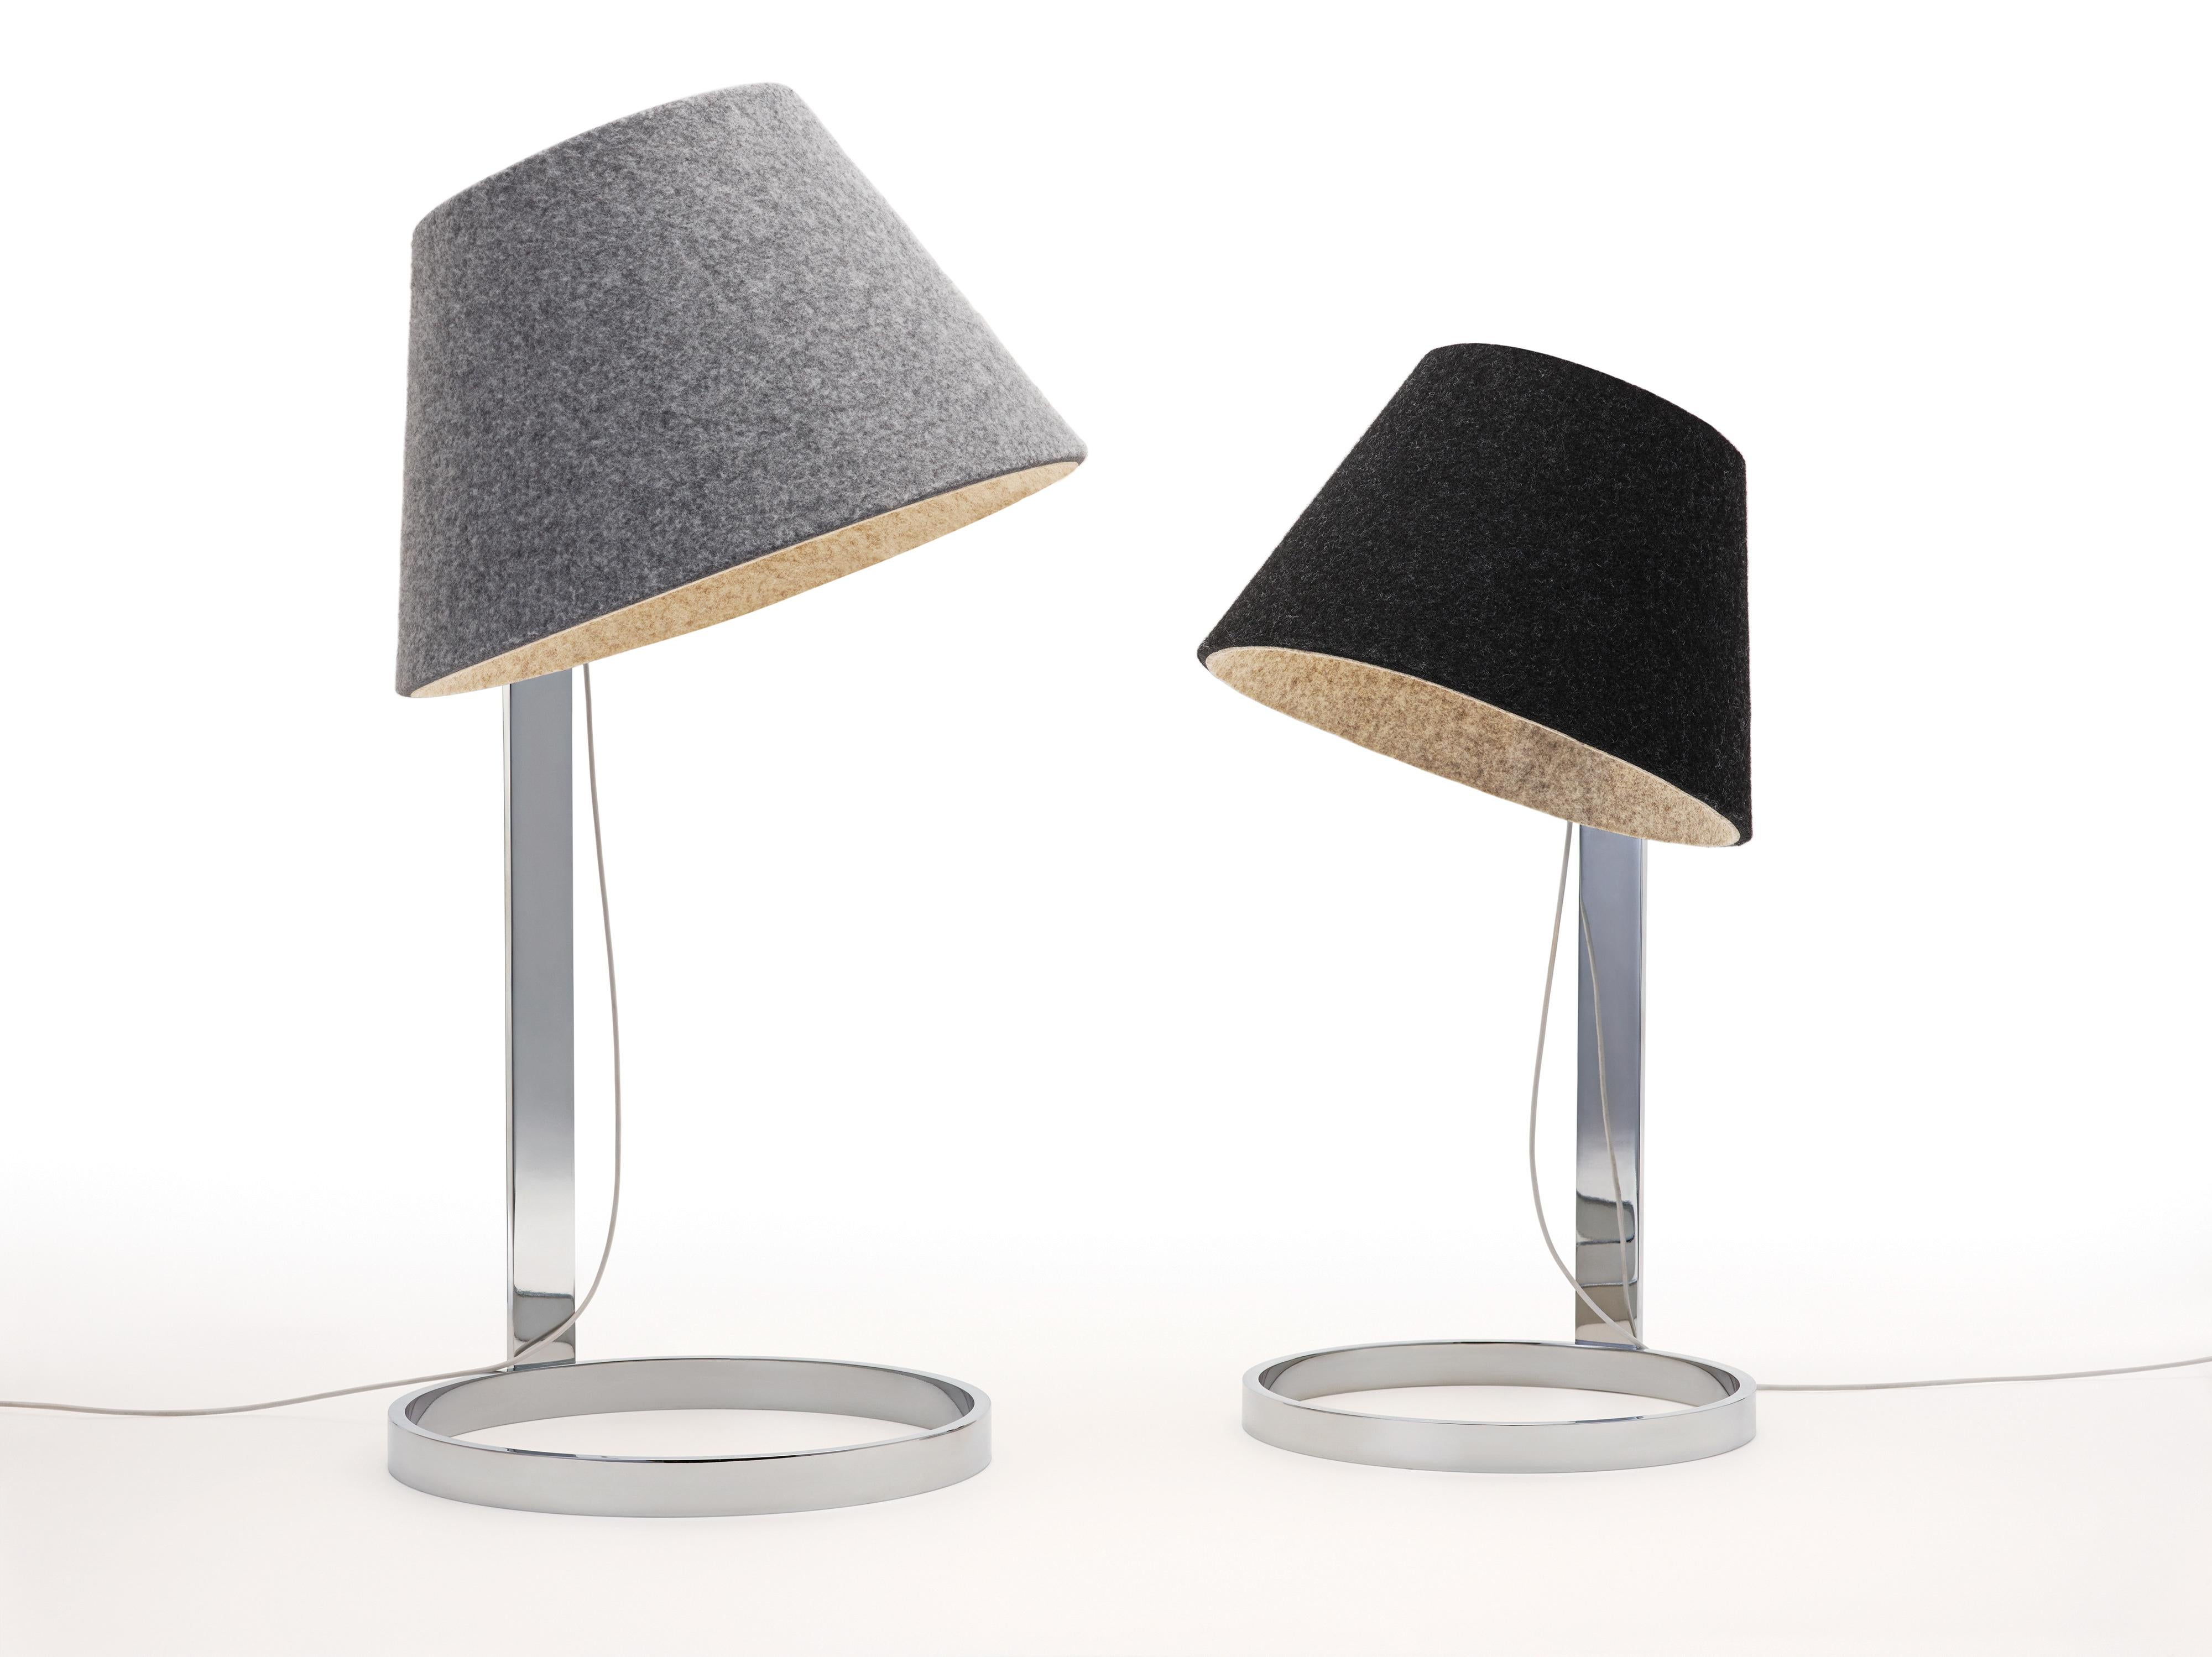 American Lana Small Table Lamp in Charcoal and Grey with White Base by Pablo Designs For Sale